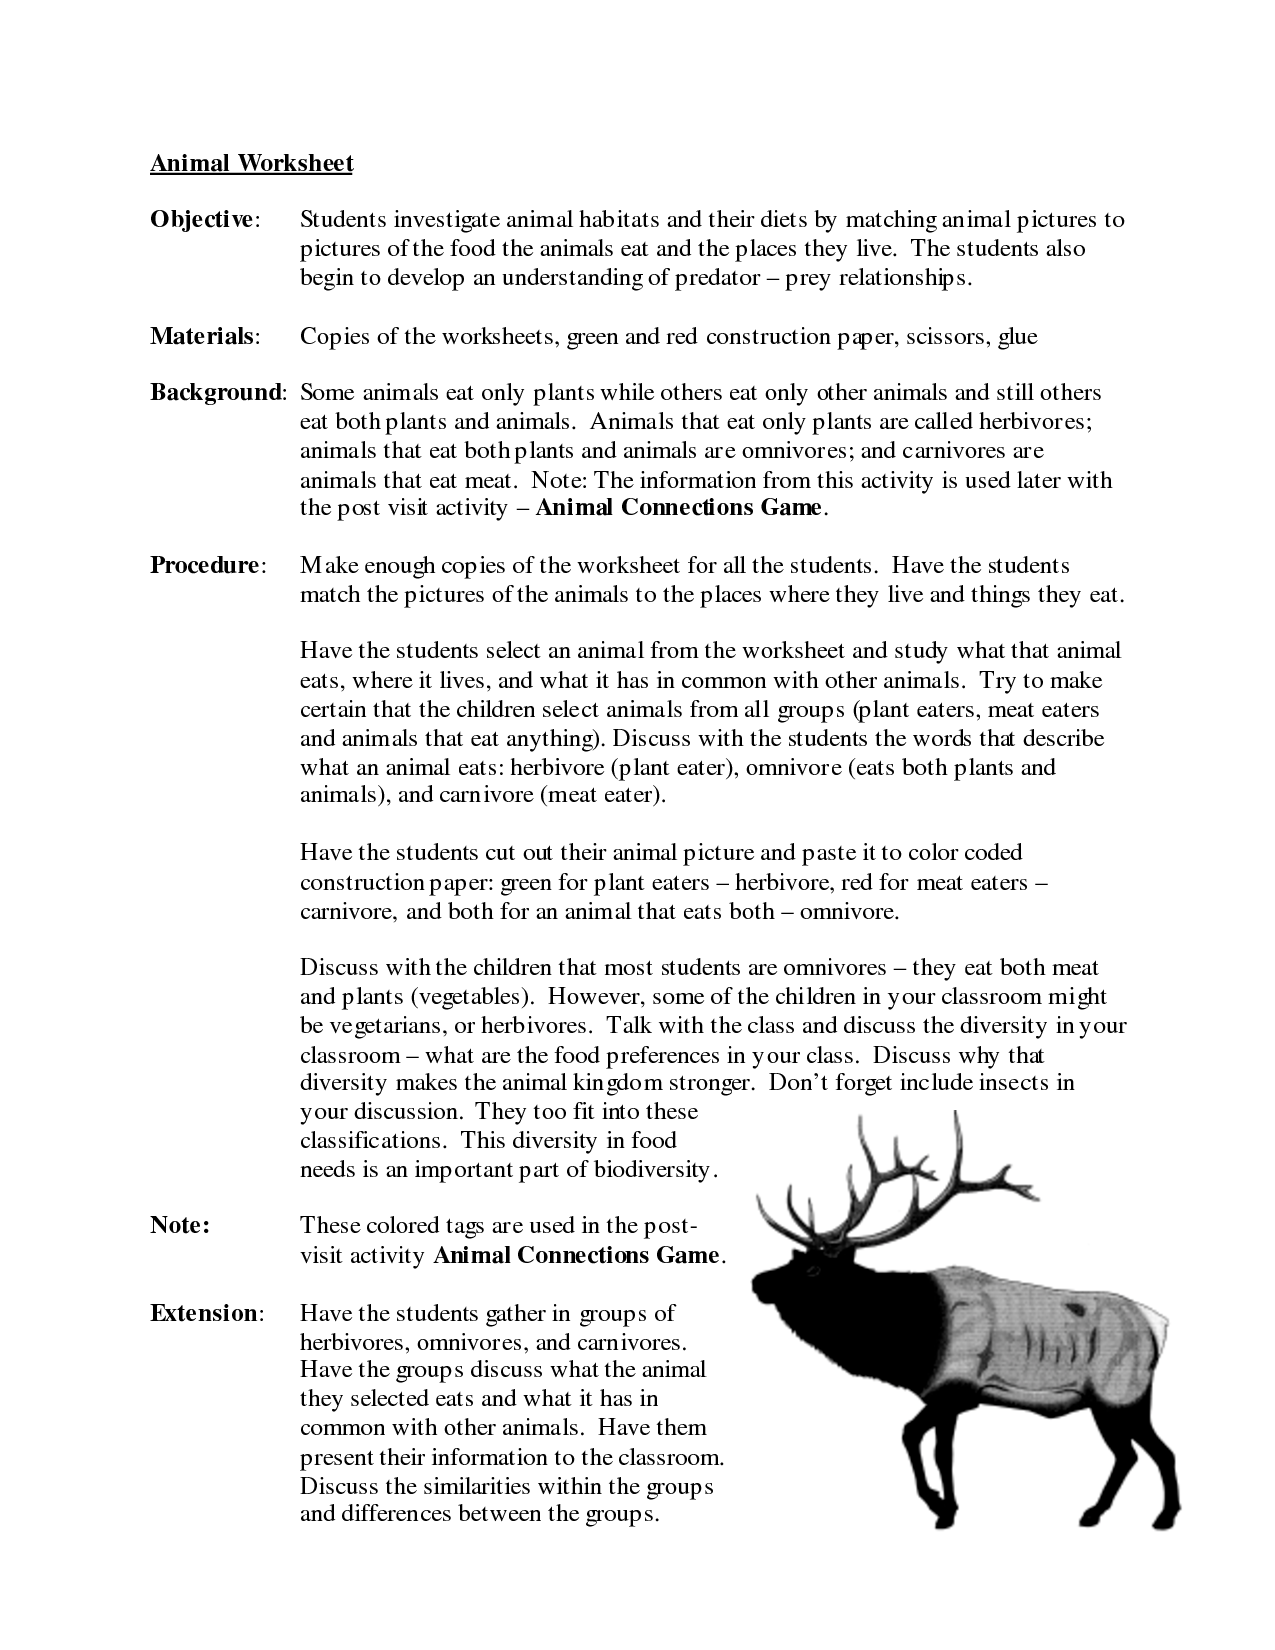 11 Best Images of Rainforest Word Search Worksheet - Rainforest Animal